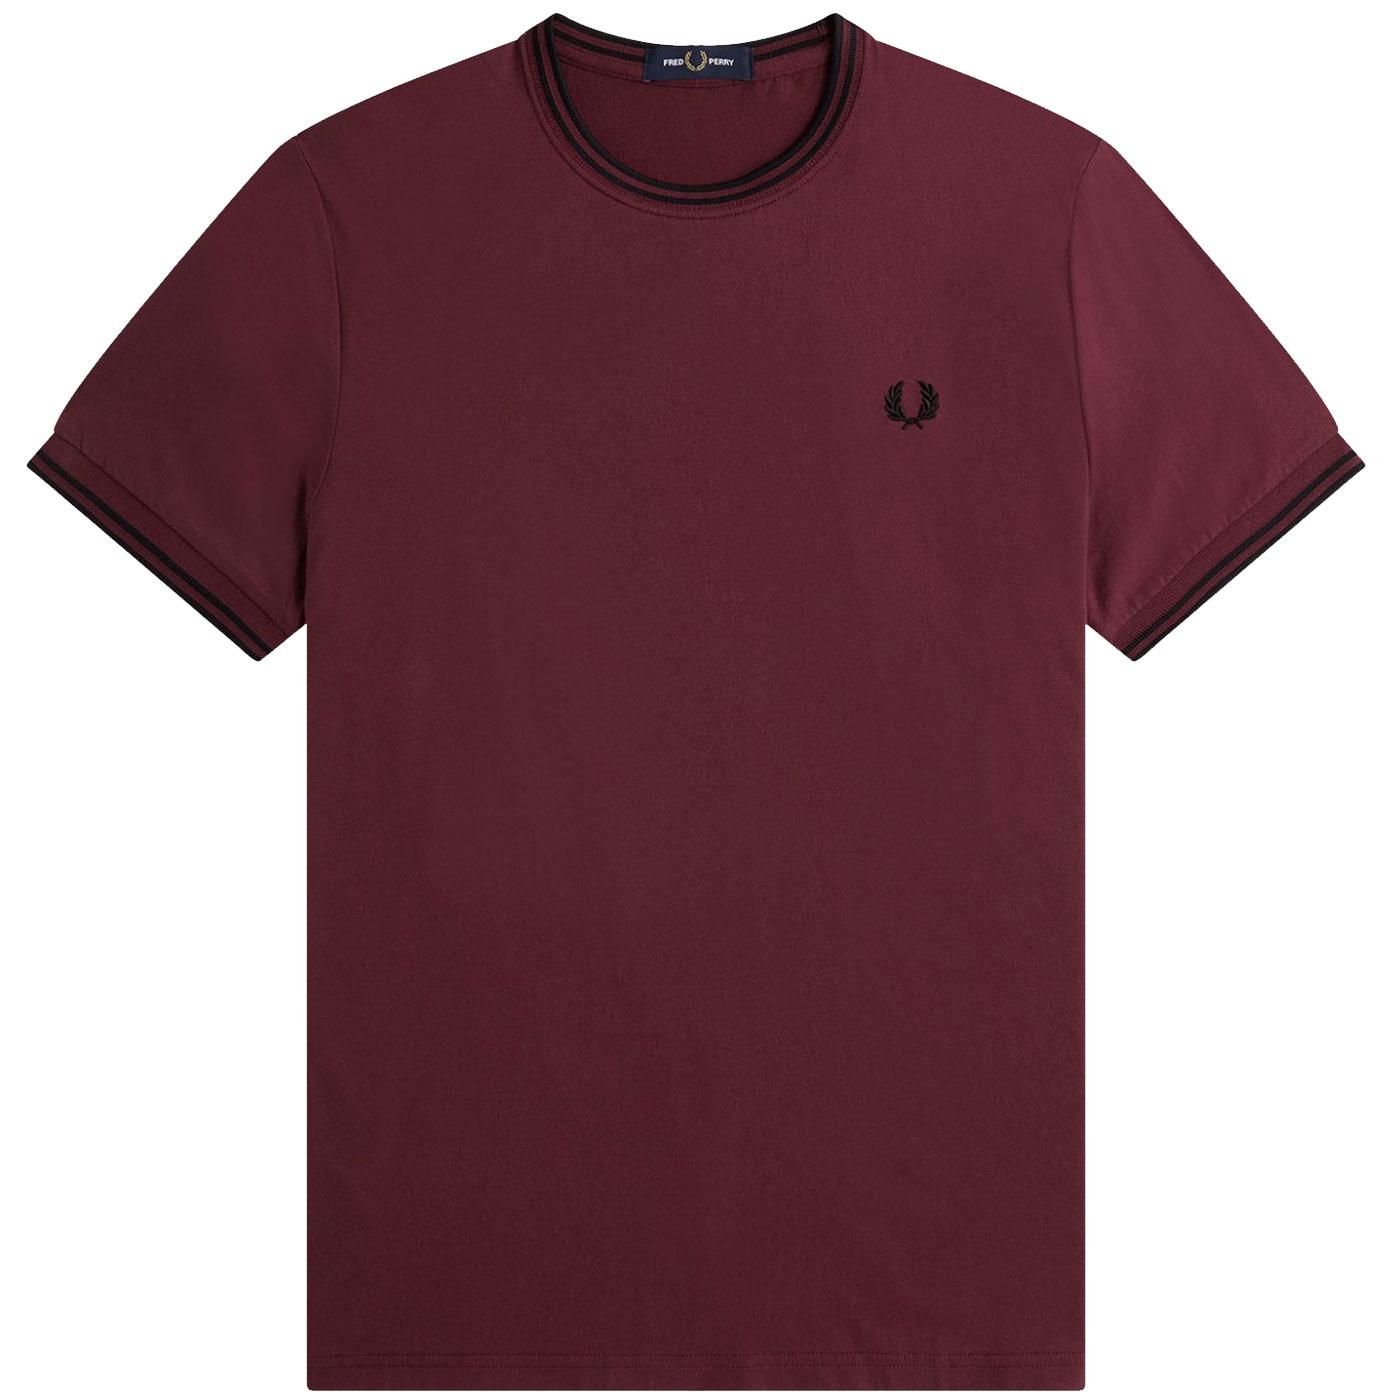 FRED PERRY M1588 Retro Twin Tipped Tee - Aubergine